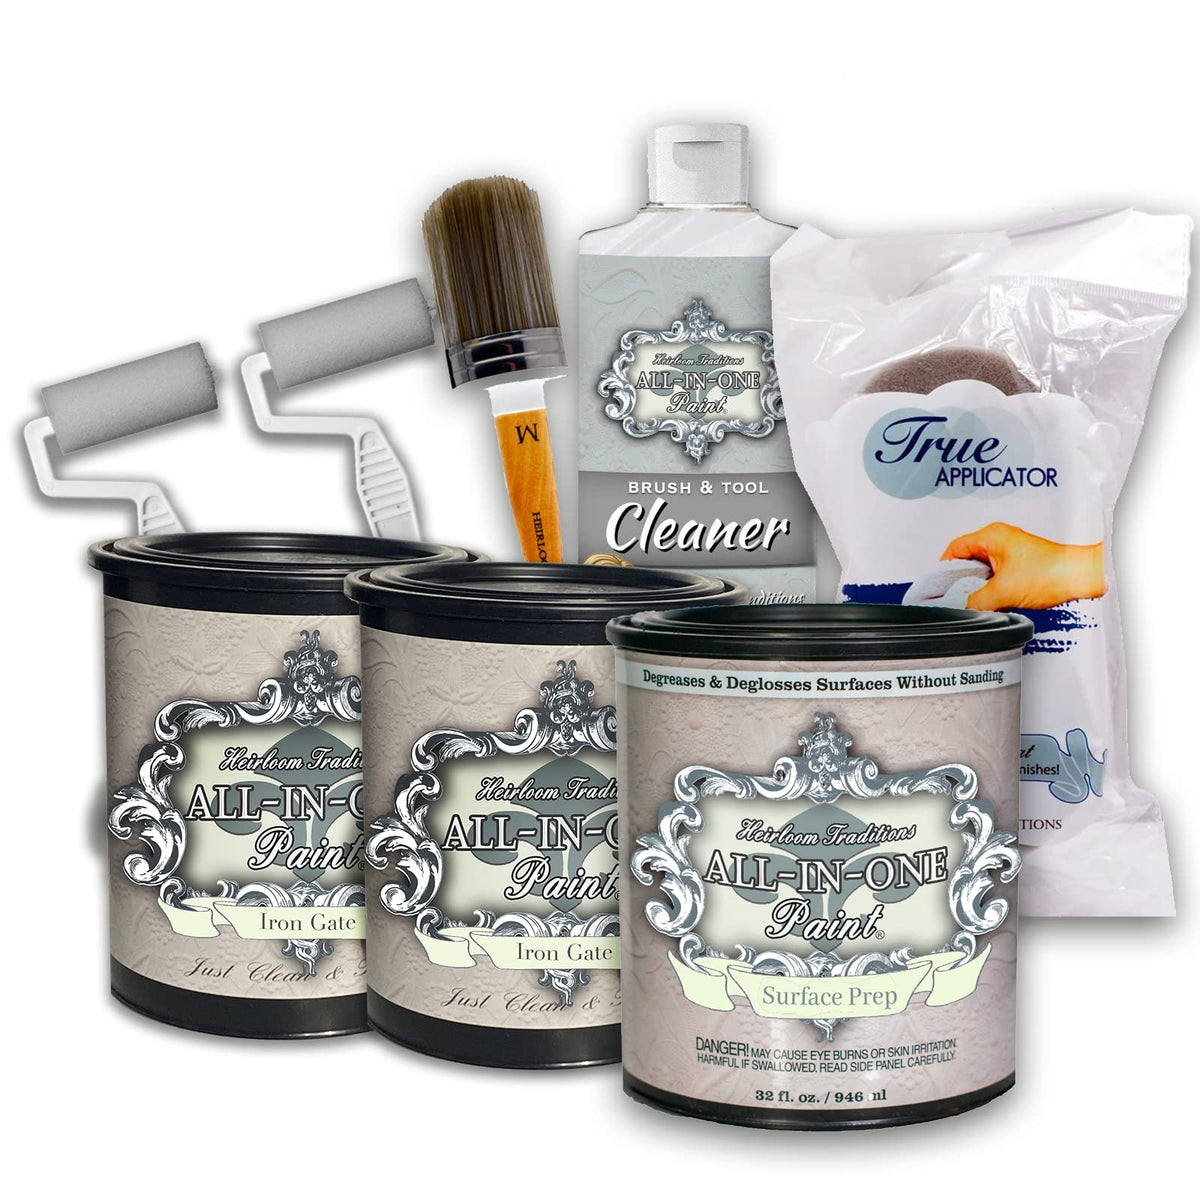 ALL-IN-ONE Paint by Heirloom Traditions, 2 Quart Cabinet Paint Bundle —  CHIMIYA